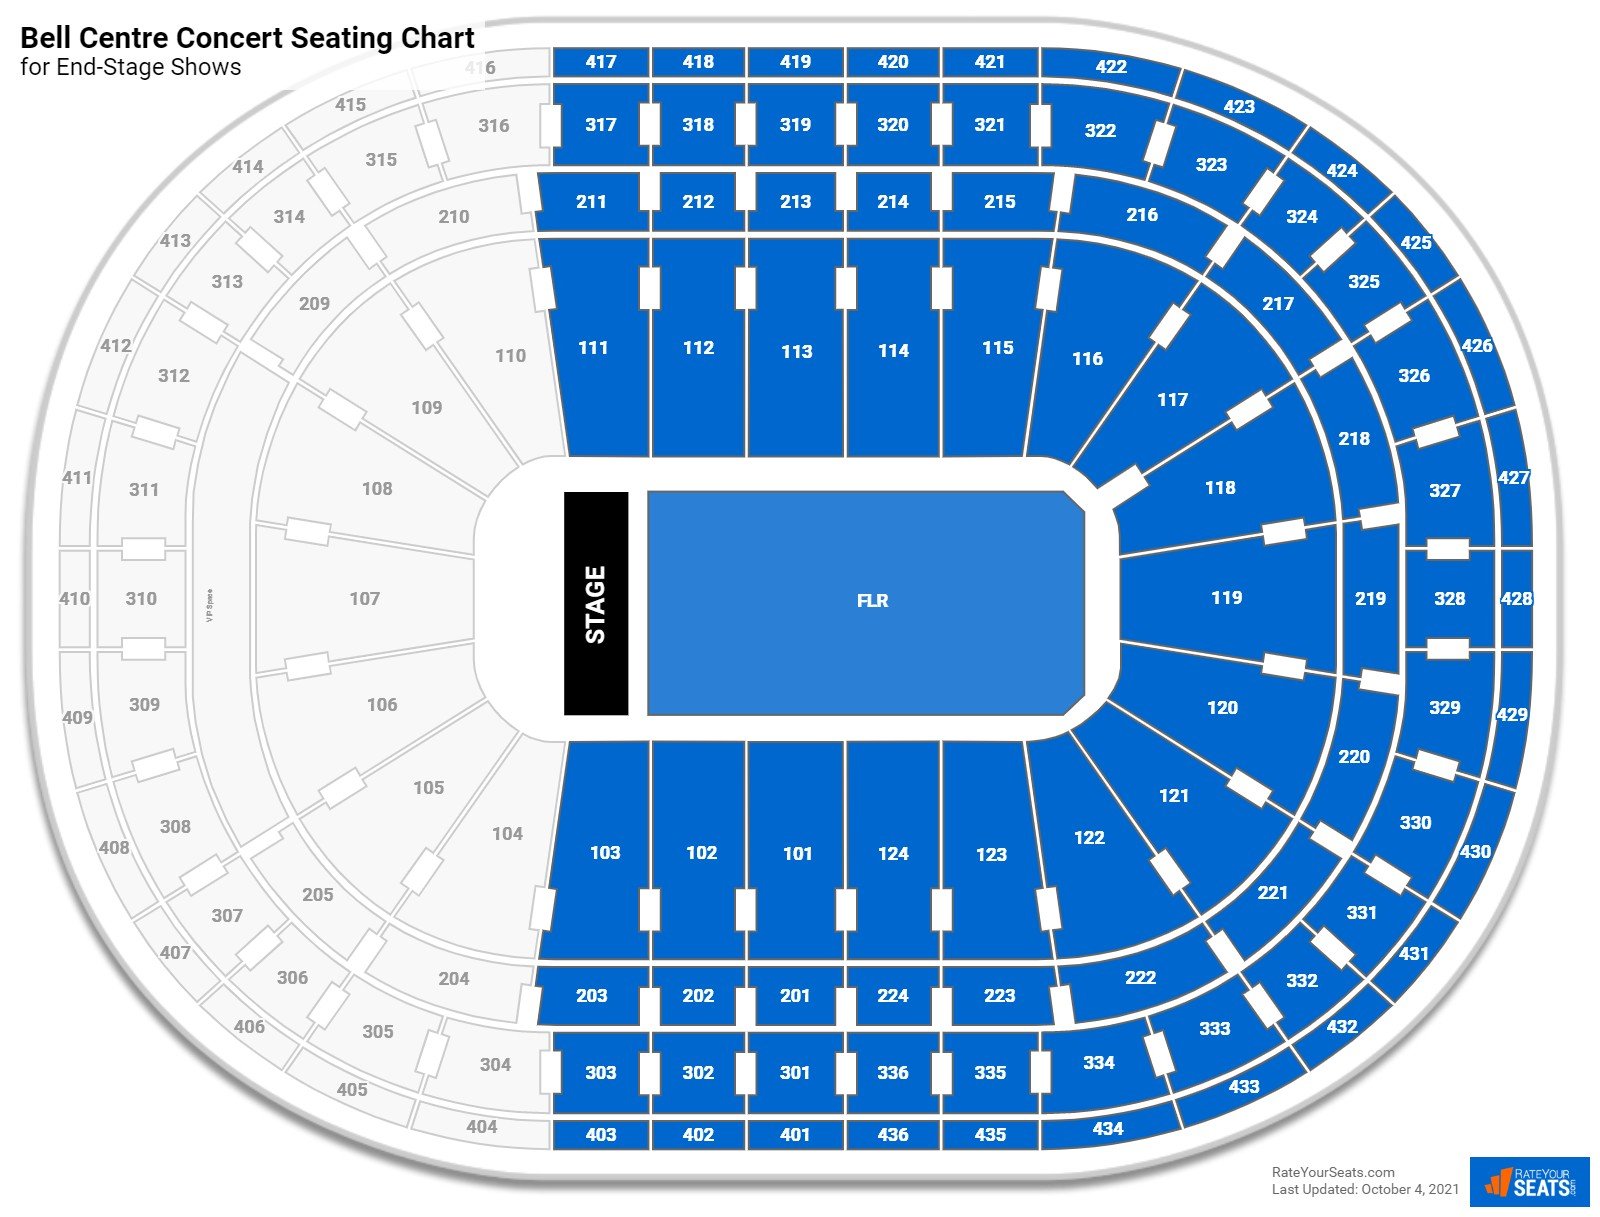 Bell Centre Seating Charts - RateYourSeats.com